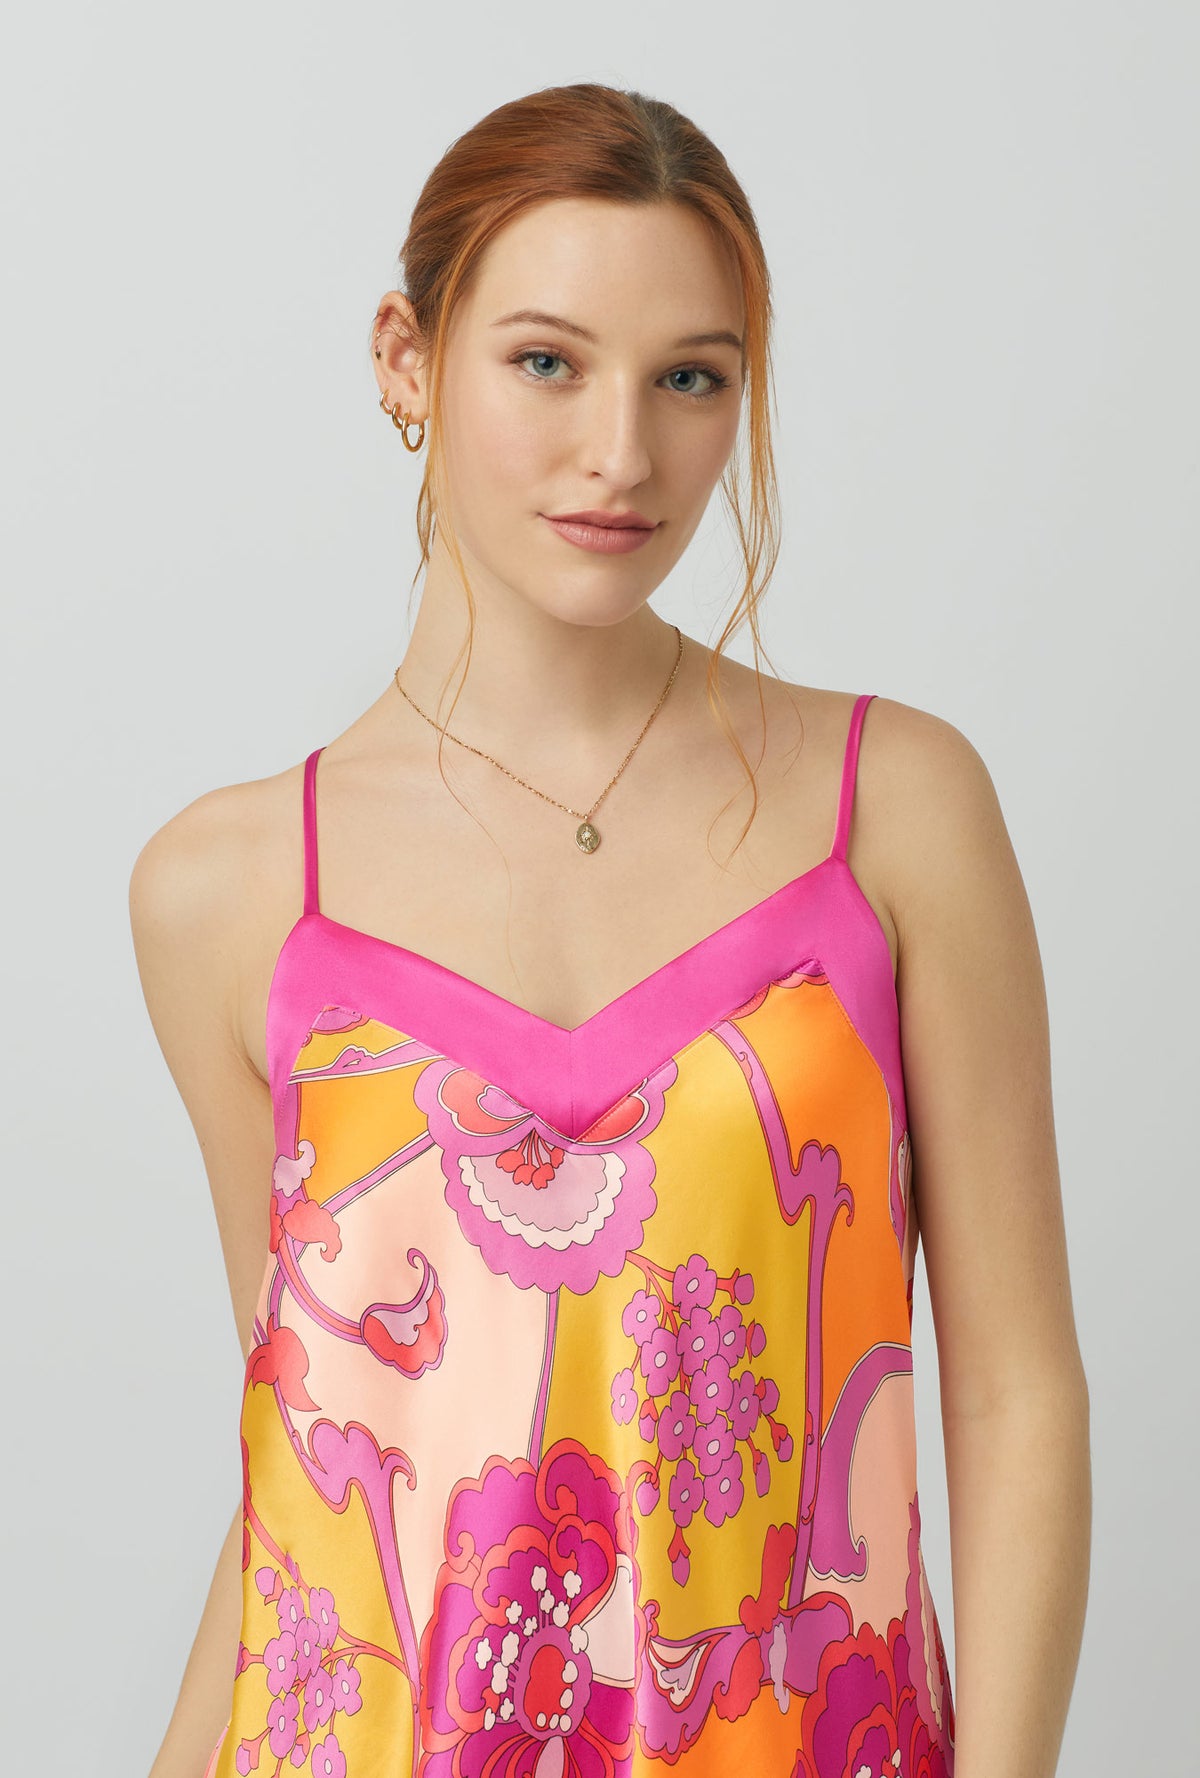 A lady wearing Silk Satin Chemise with apache bloom print